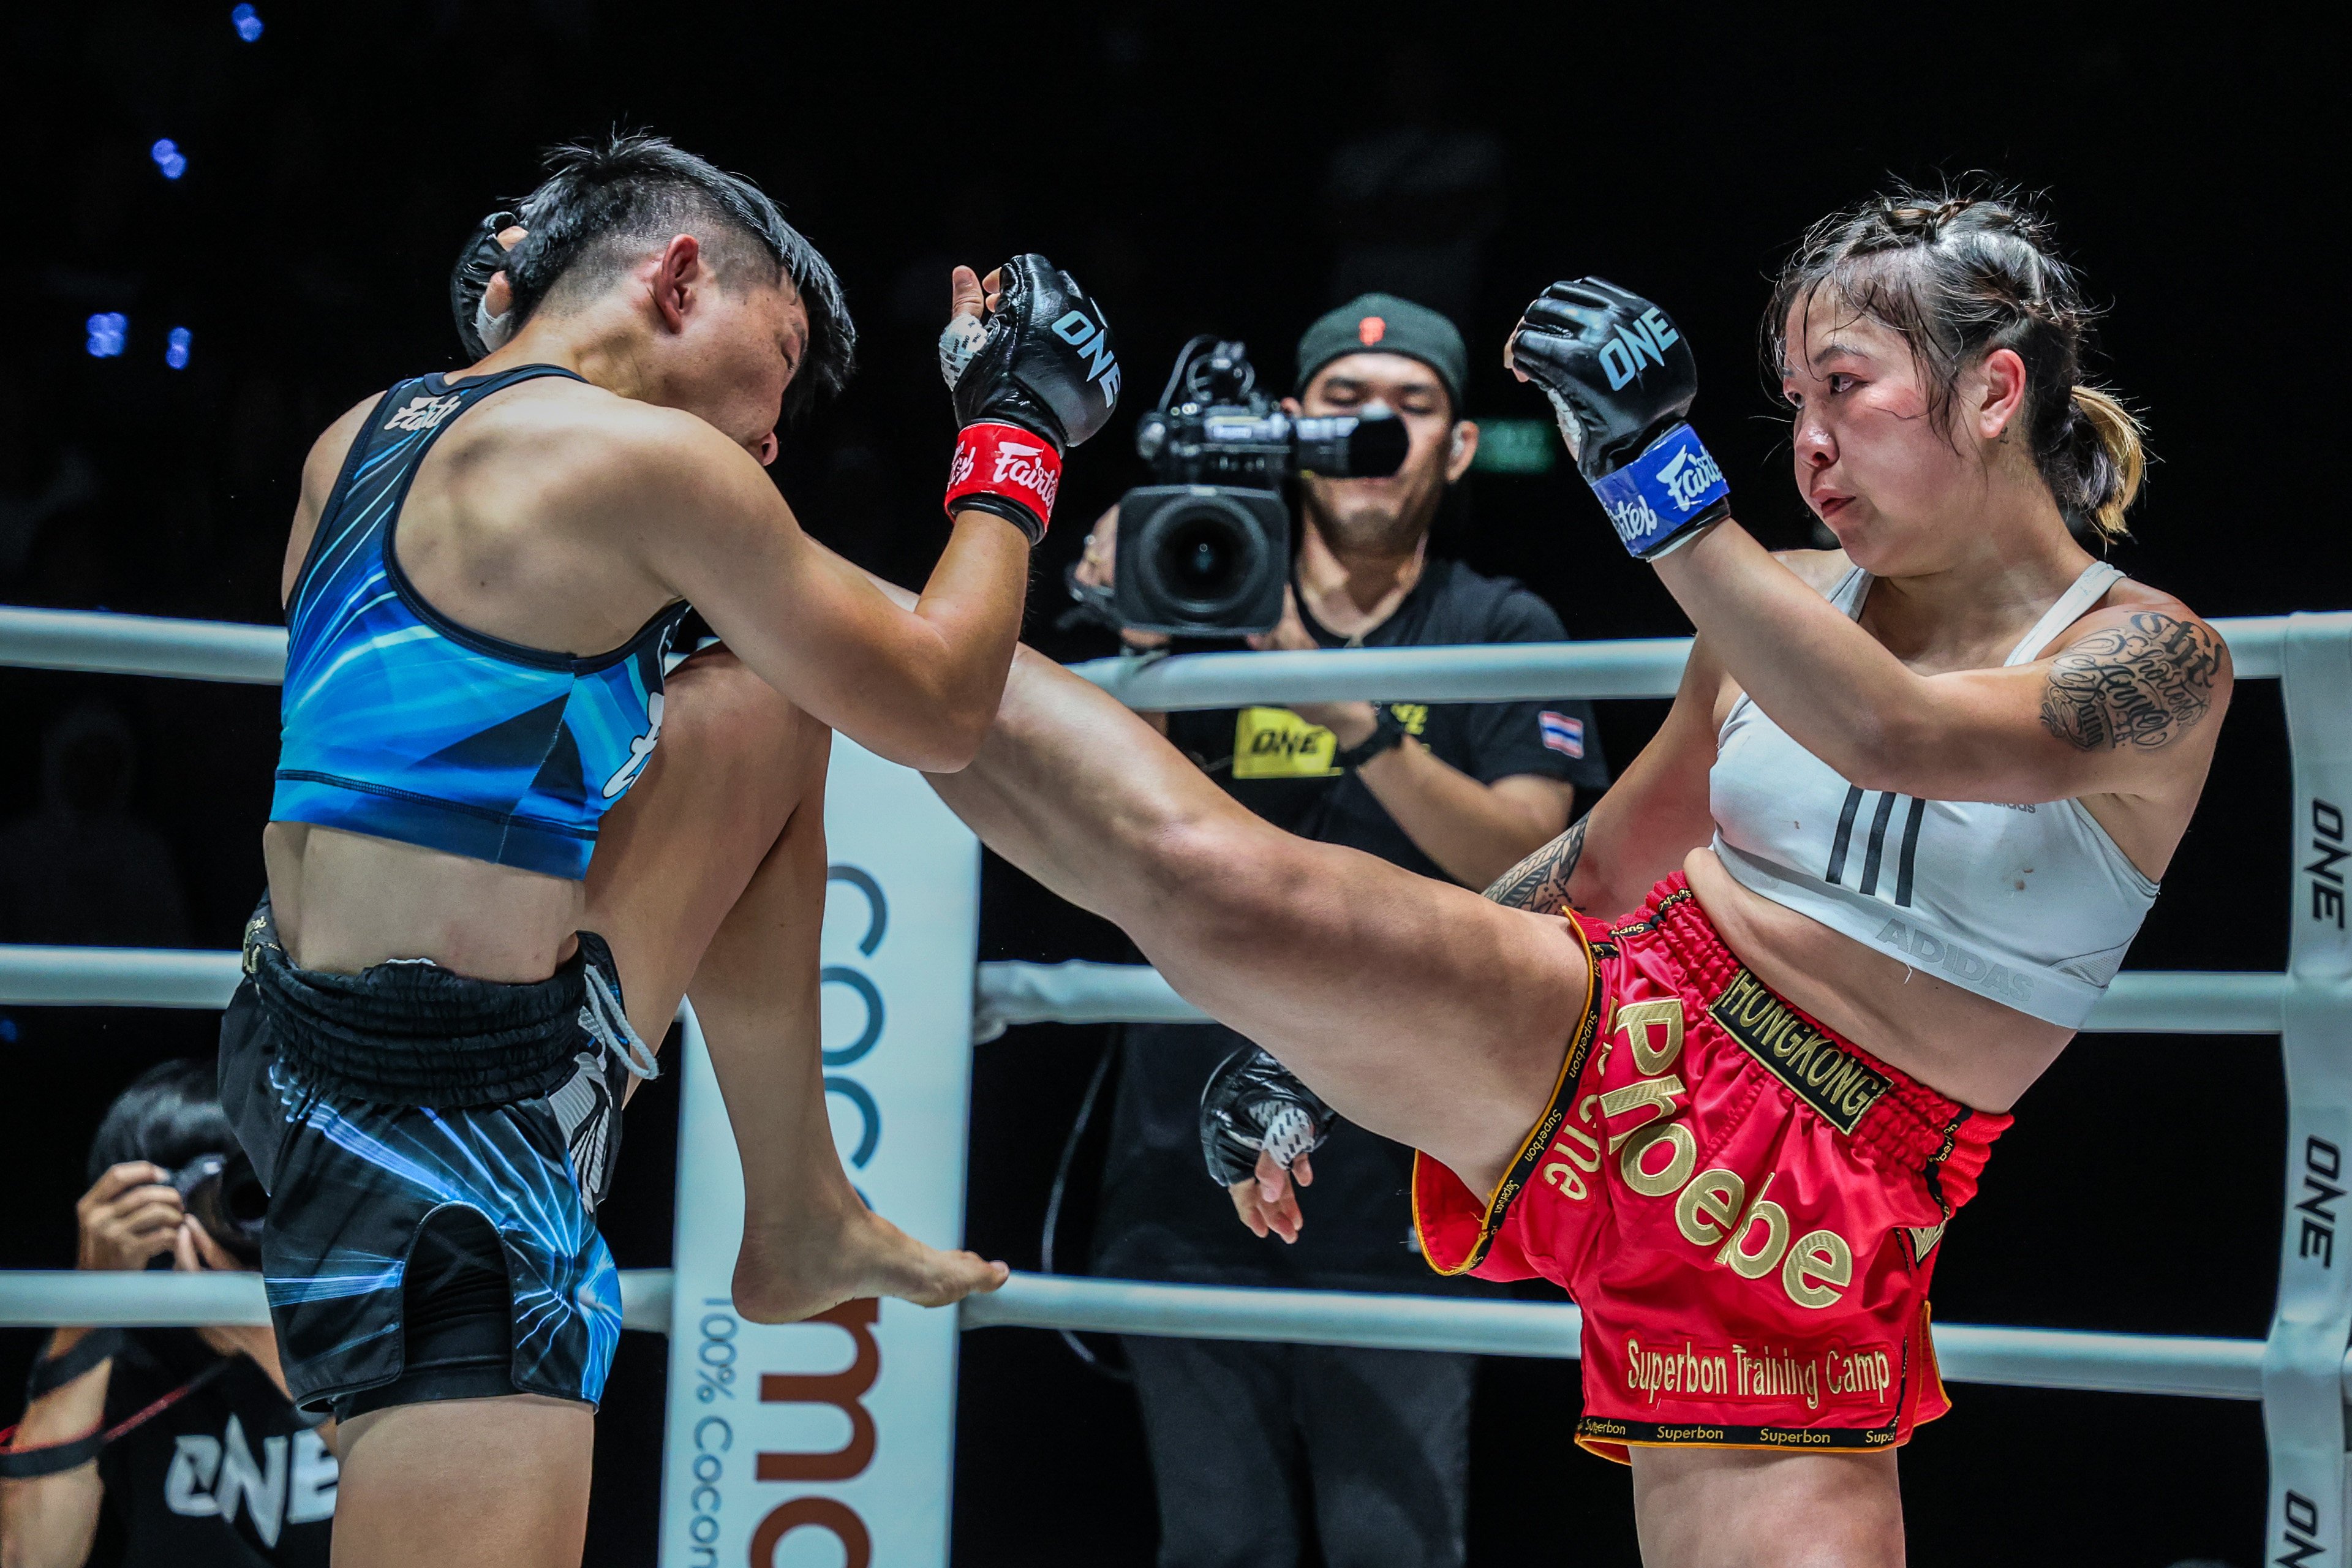 Hong Kong’s Phoebe Lo connects with a kick during her fight against Nongam Fairtex at ONE Friday Fights 62. Photo: ONE Championship